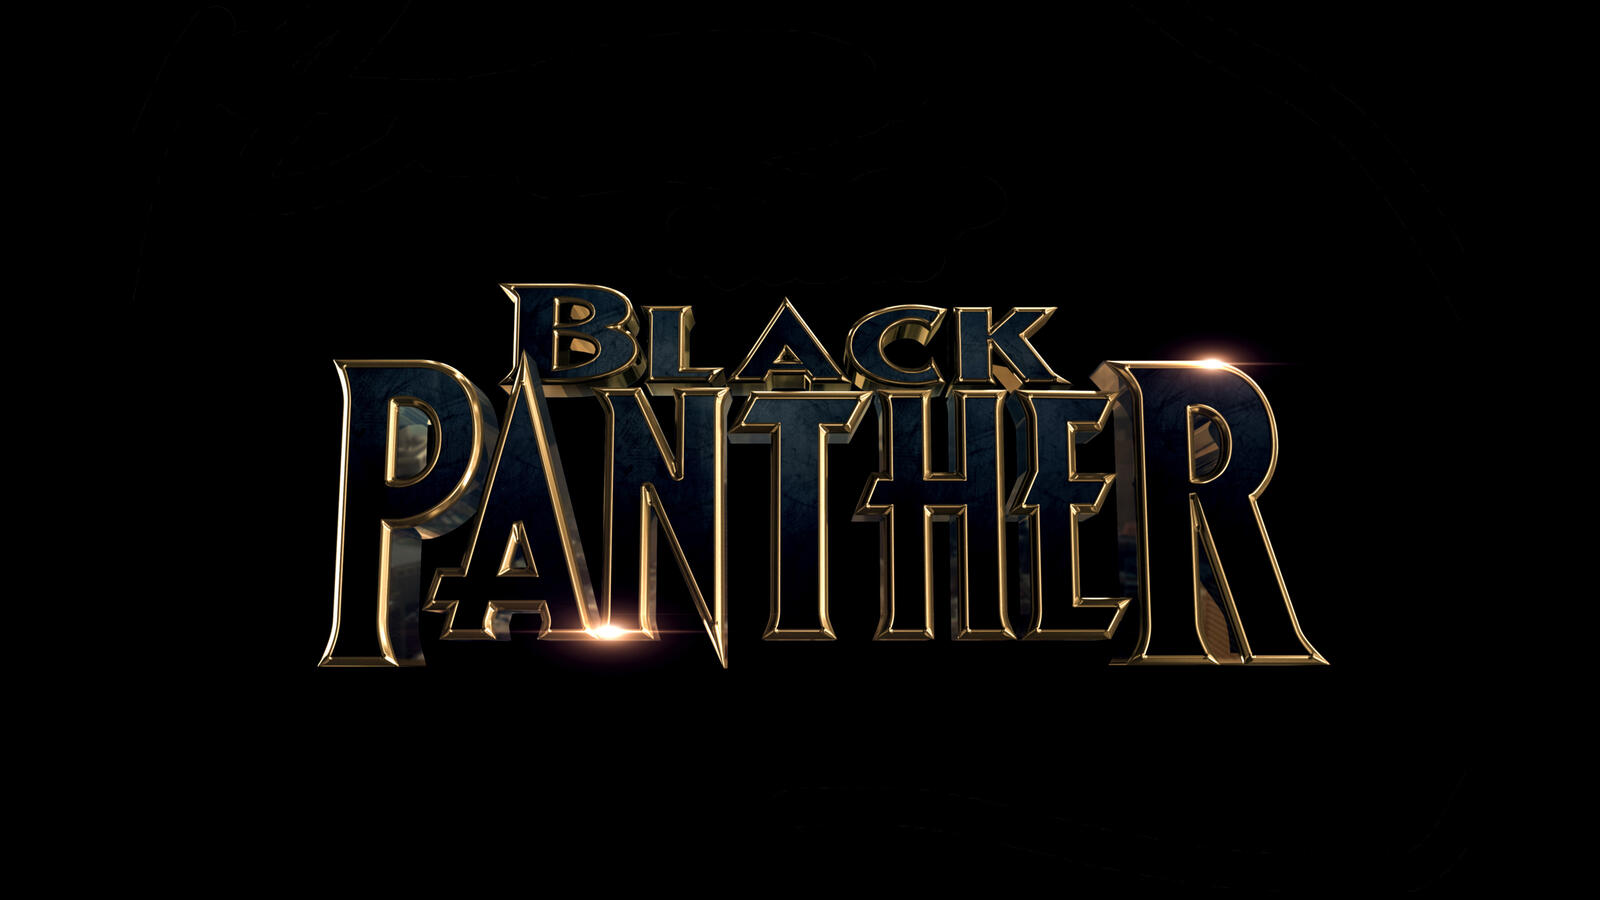 Wallpapers a black panther 2018 movies logo on the desktop